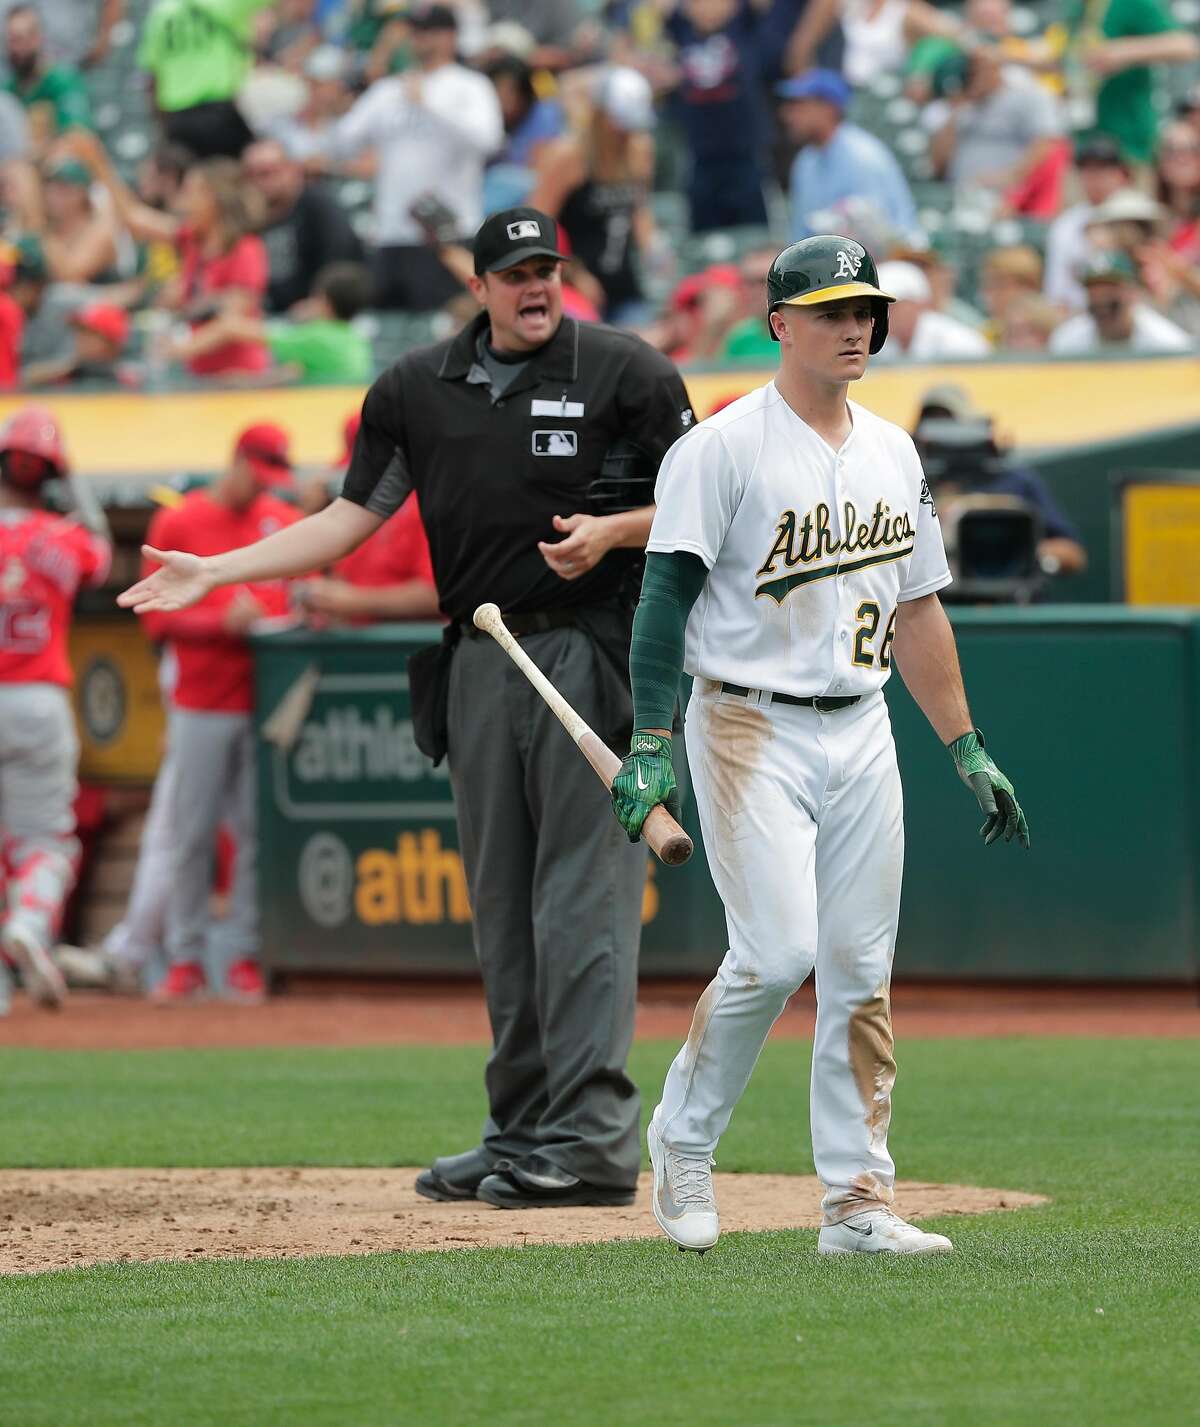 A's Matt Chapman, 26 walks back to the dugout after being called out looking to end the sixth inning as home plate umpire Jordan Baker barks back at Chapman, as the Oakland Athletics take on the Los Angeles Angels at the Oakland Coliseum in Oakland, Ca. on Mon. September 4, 2017.